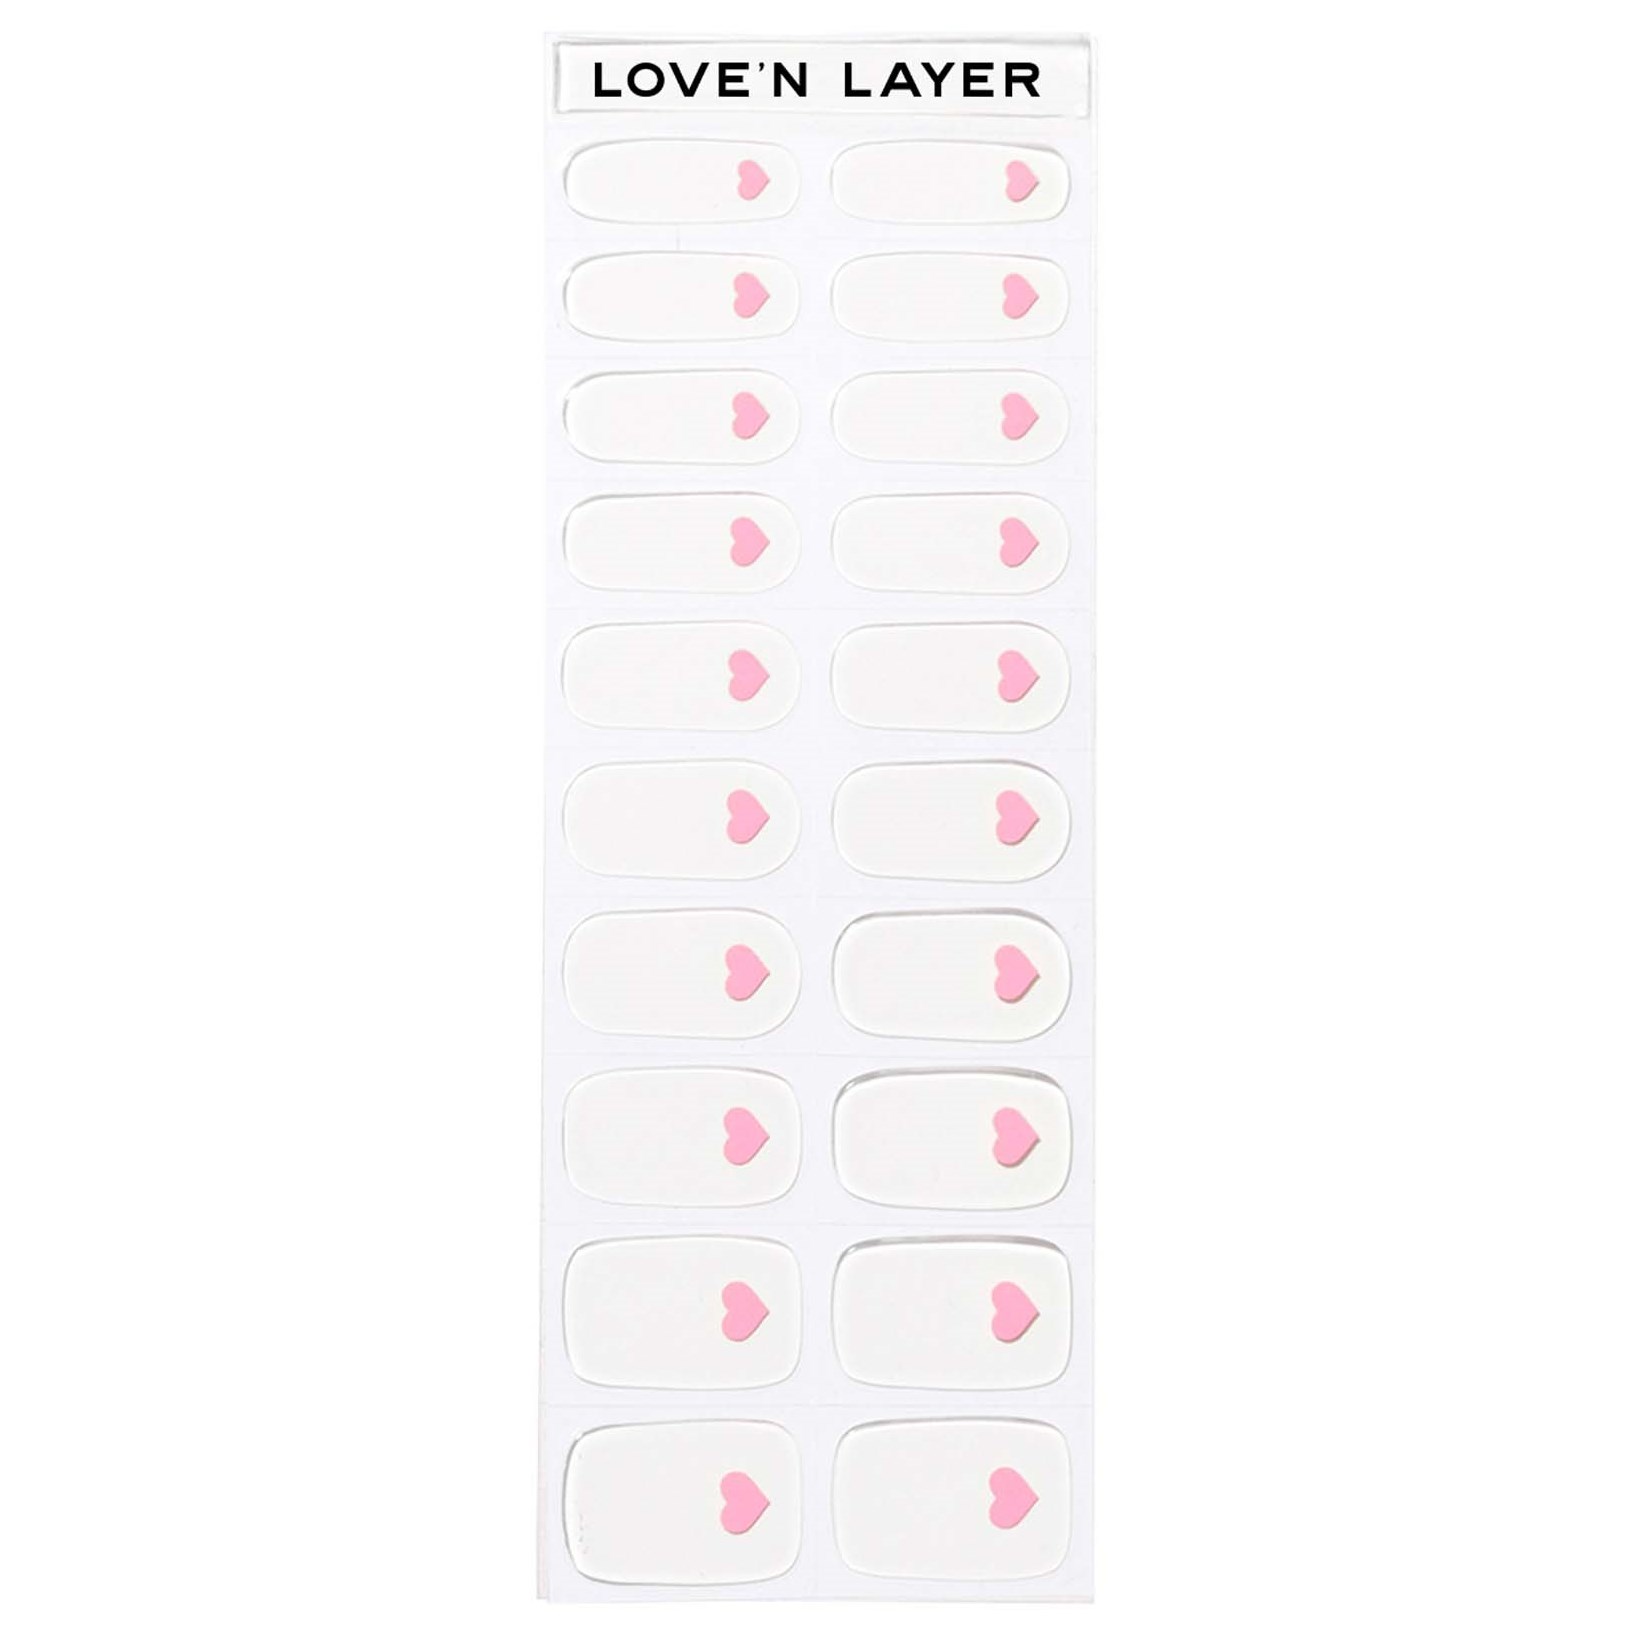 Loven Layer Single Love Layers Summer Pink